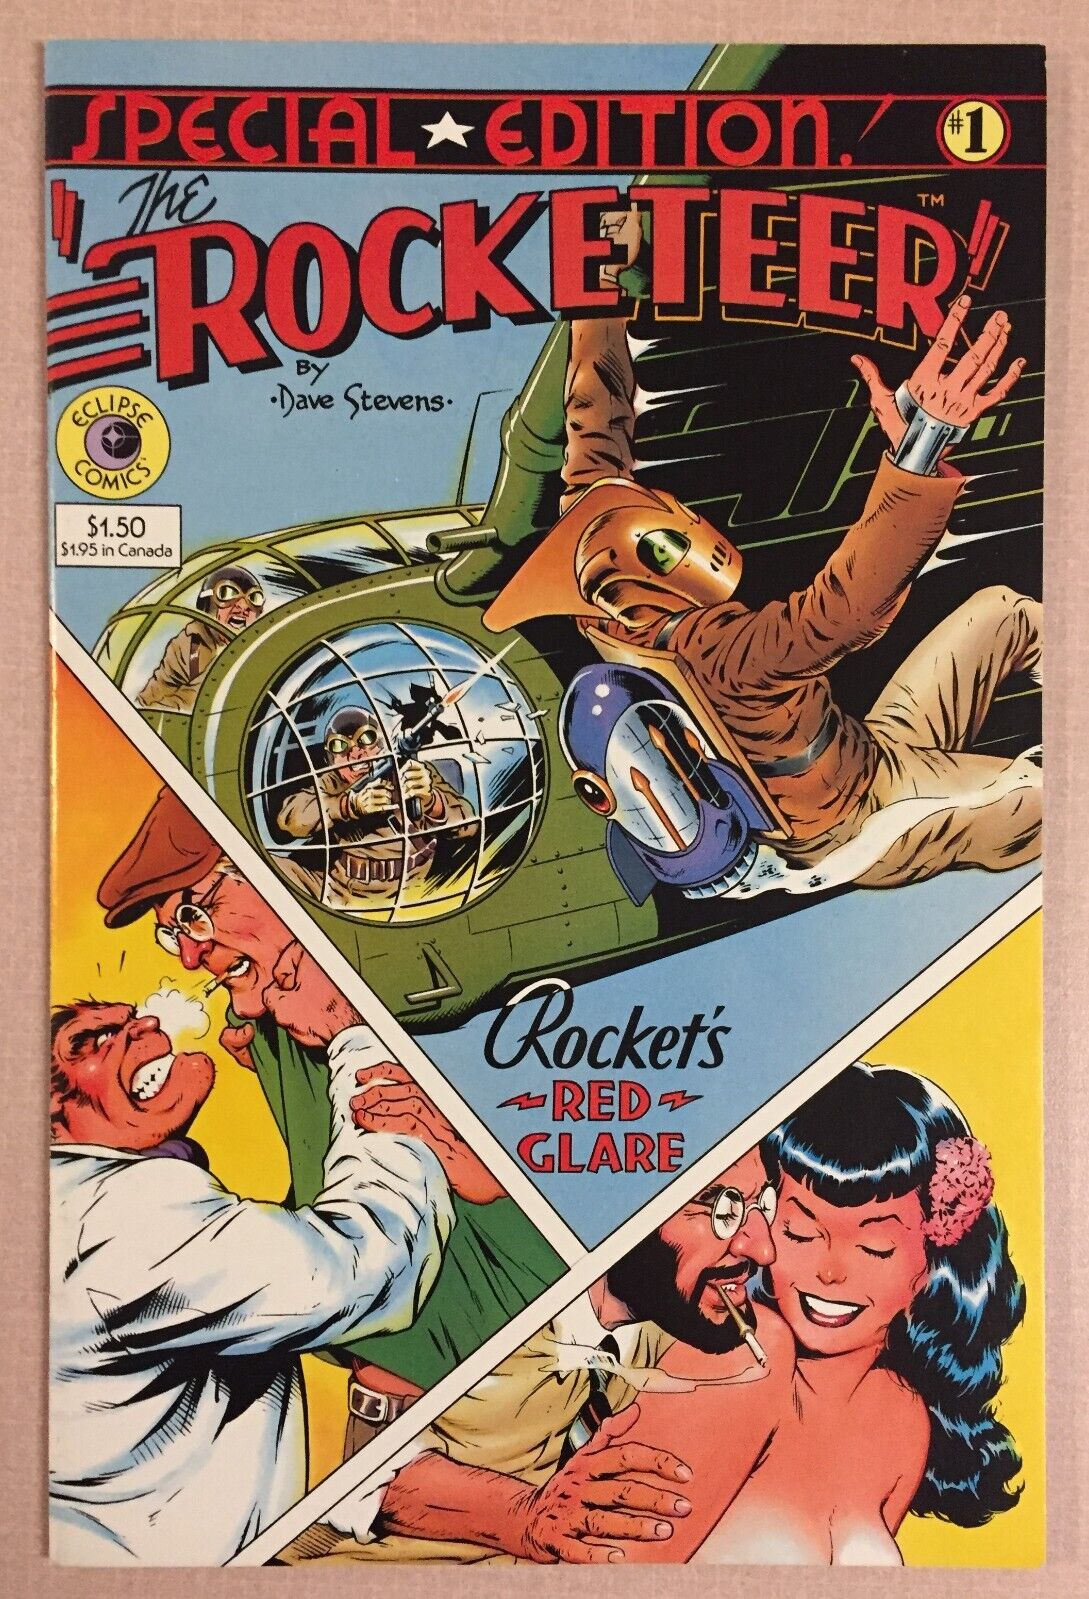 Rocketeer Special Edition 1 Eclipse Comics 1984 Bettie Page Dave Stevens art HG